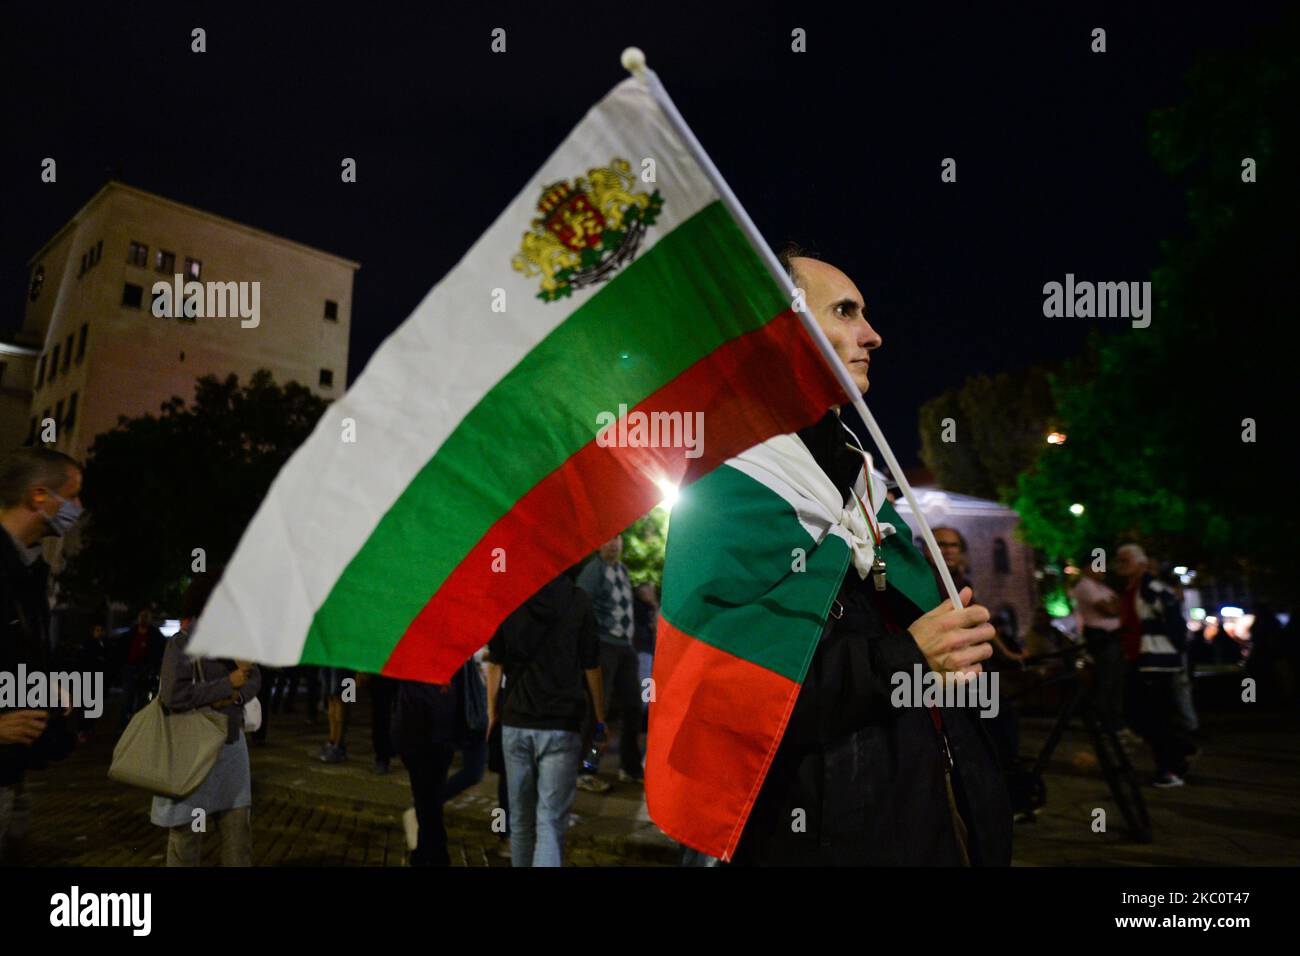 A protester holds a Bulgarian national flag on the 82nd day of anti-government protest in Sofia, in the Triangle of Power (the space between the buildings of the Presidency, the National Assembly and the Council of Ministers). For nearly three months people have been taking part in daily protests against corruption, demanding the resignation of the government of Boyko Borissov, in power since 2009. On Monday, September 28, 2020, in Sofia, Bulgaria. (Photo by Artur Widak/NurPhoto) Stock Photo